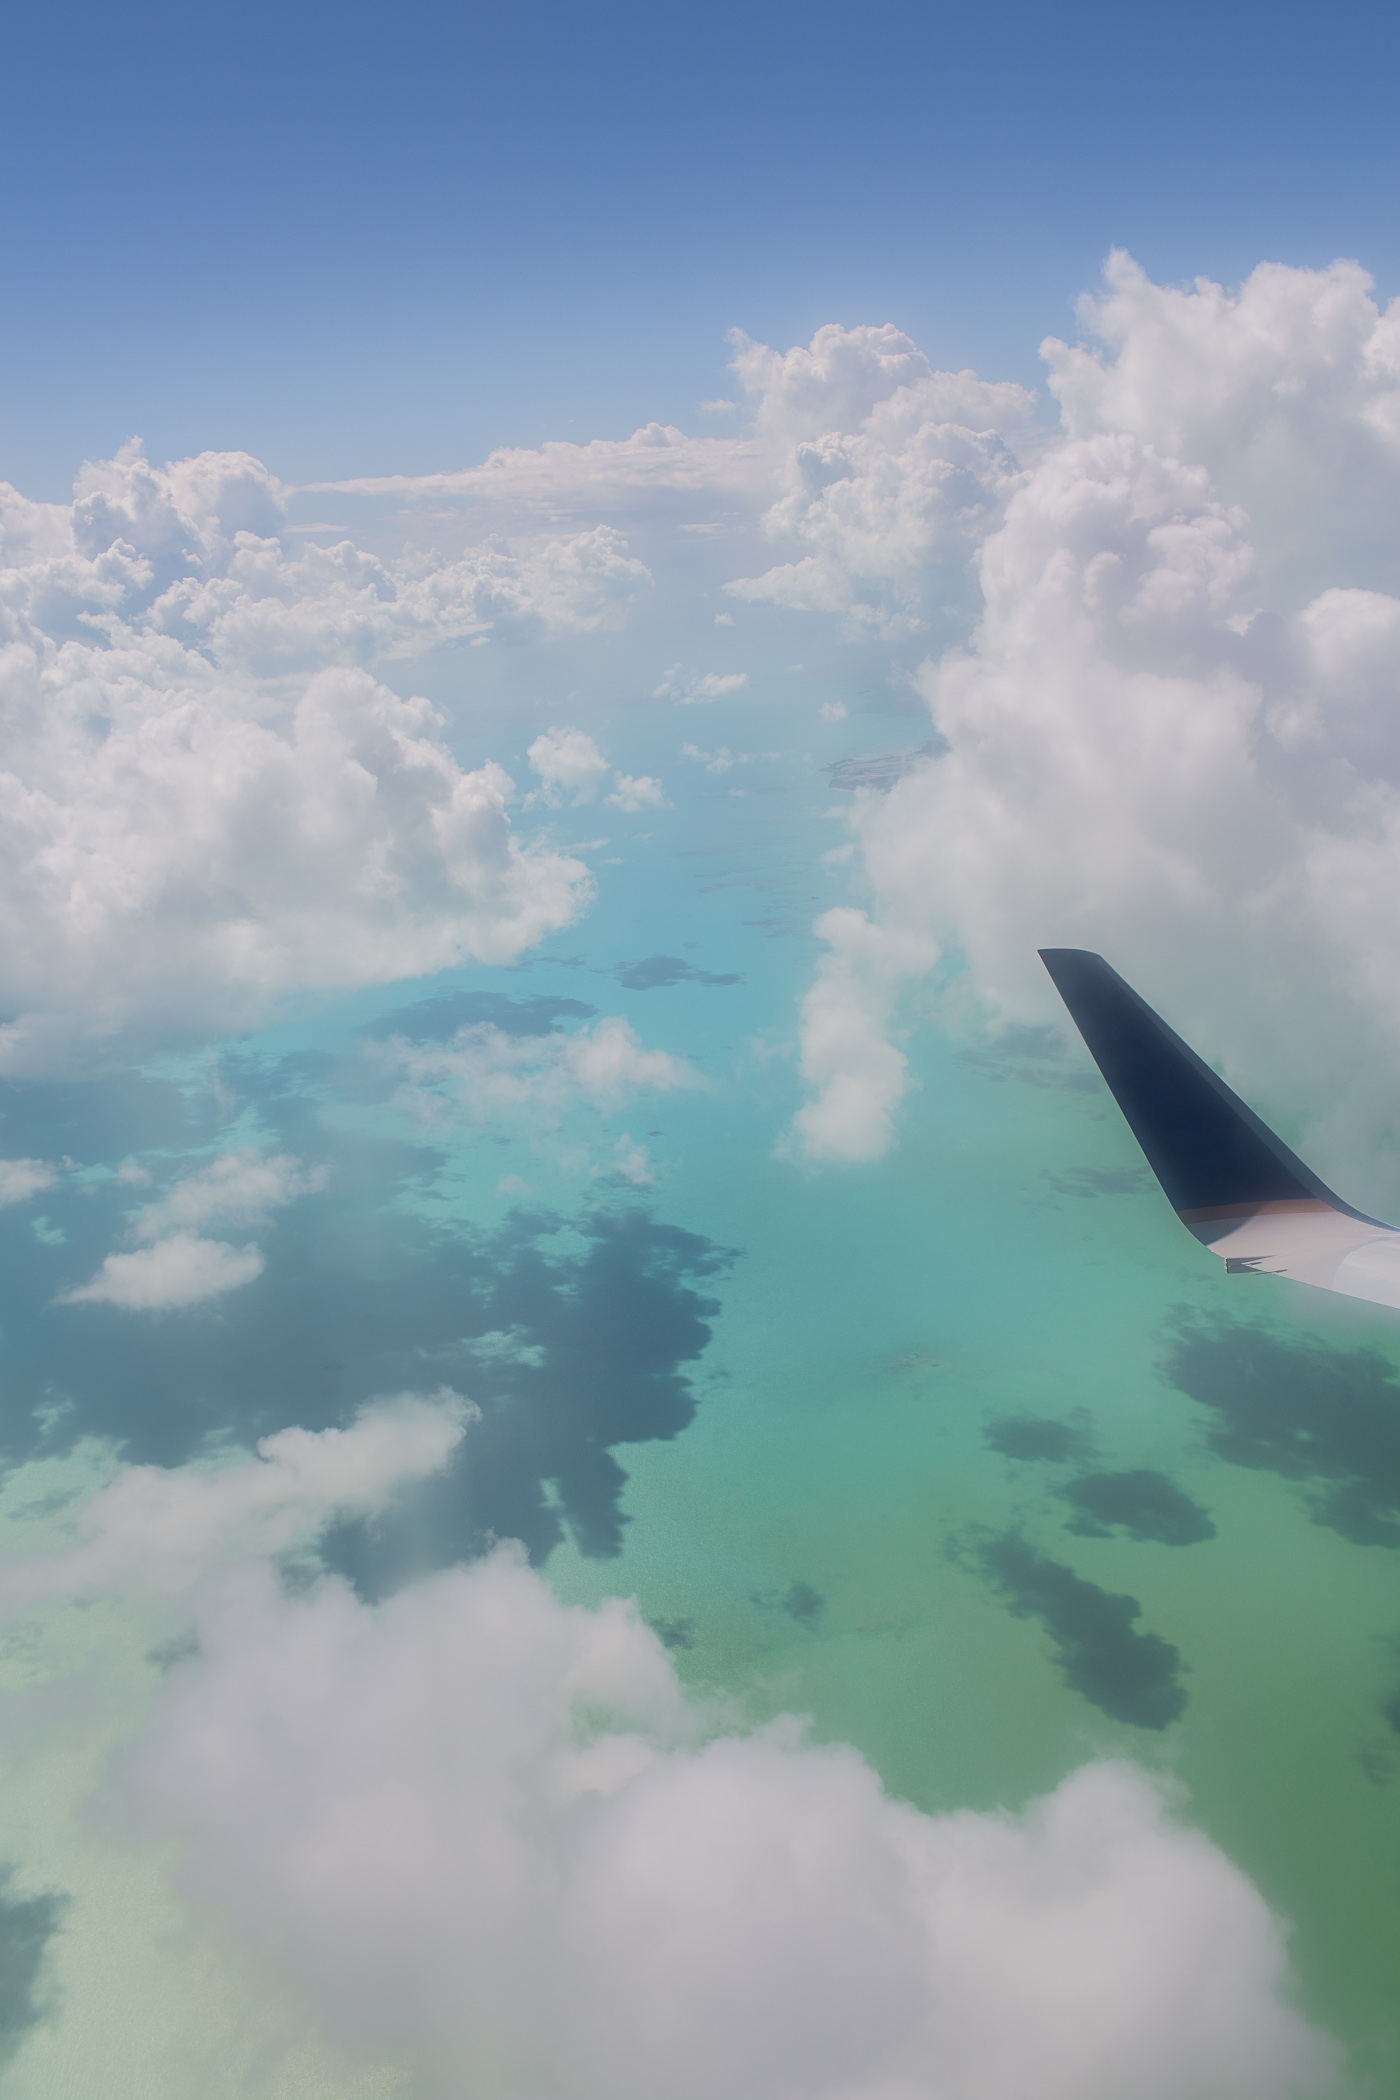 Overwing shot over Turks and Caicos islands. Beautiful water!